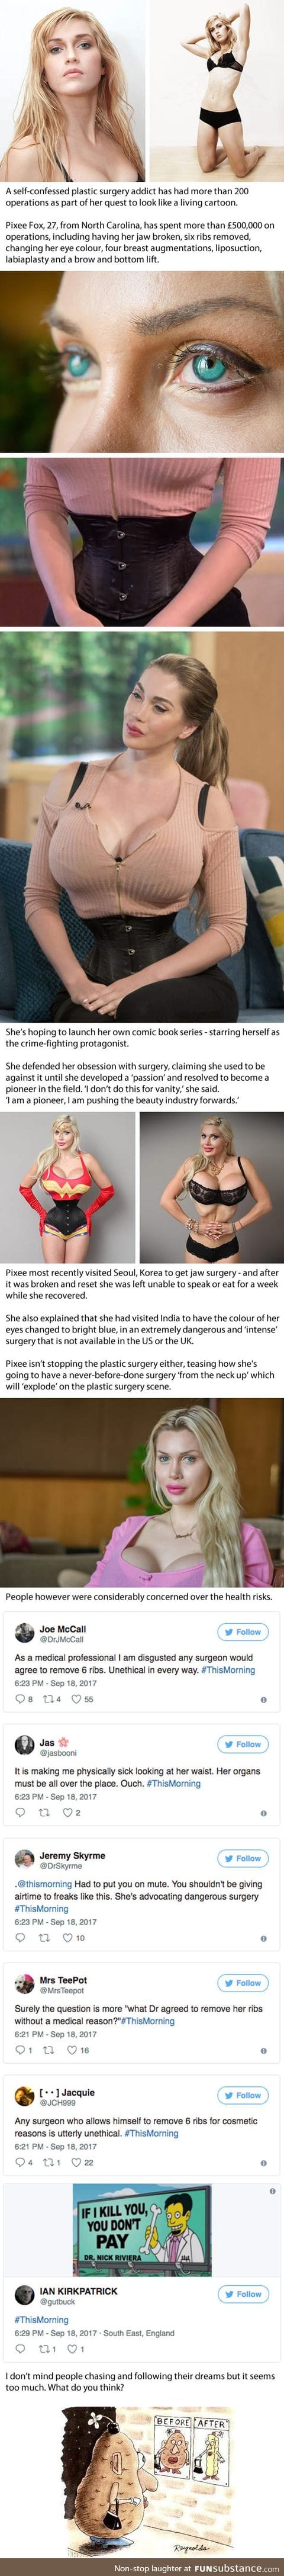 Woman Removes Six Ribs To Look Like Wonder Woman